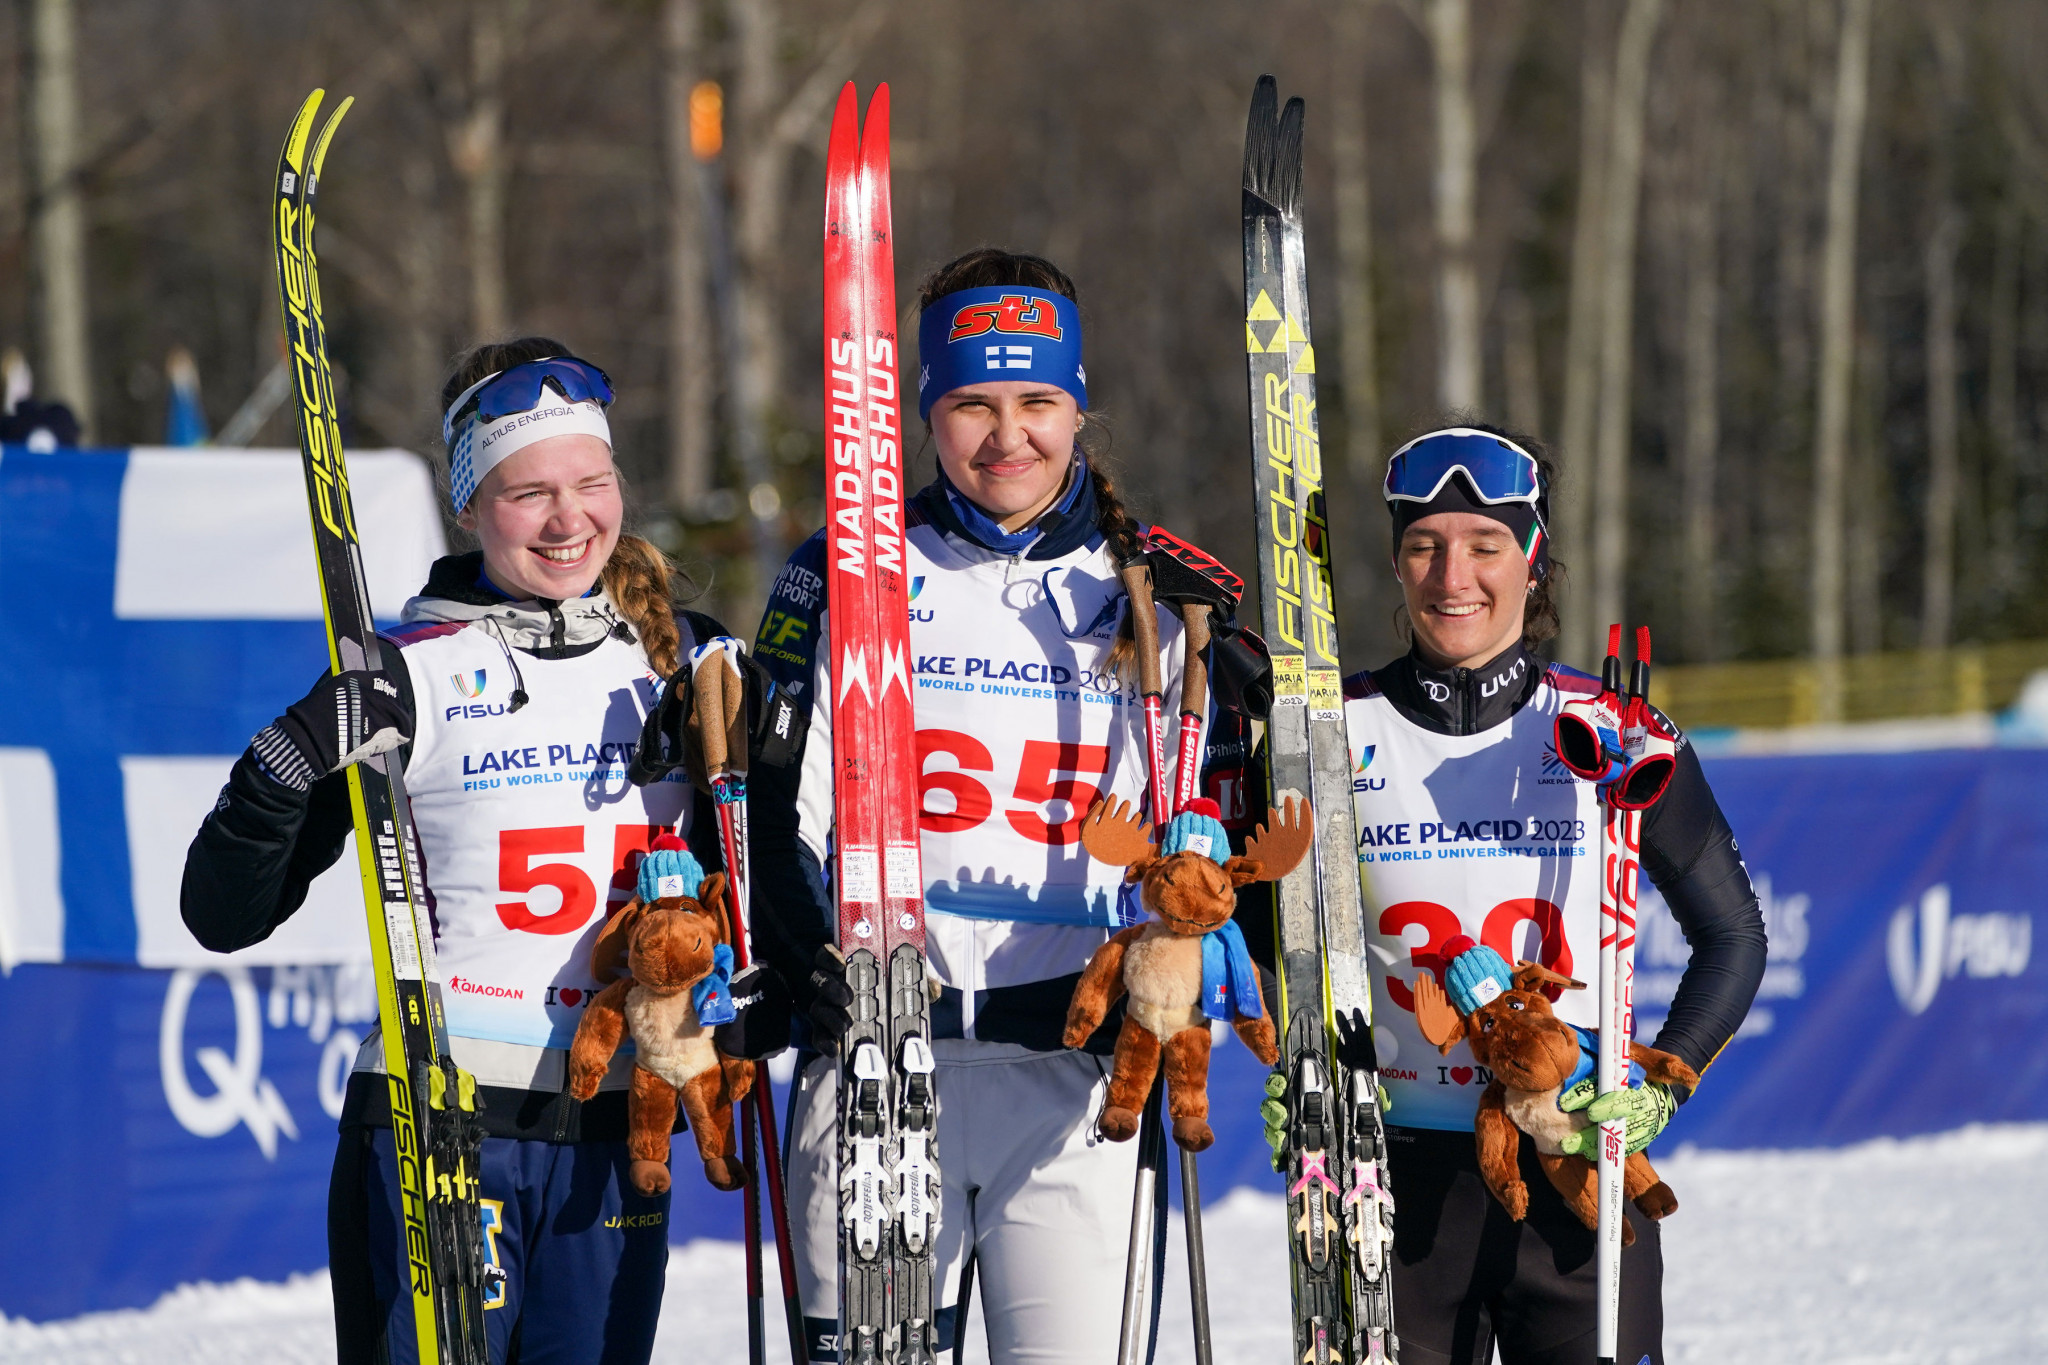 The Finn denied Estonia's Mariel Pulles, left, a second gold medal from the Games with her 13:20.8 finish while Maria Boccardi, right, bagged bronze ©FISU